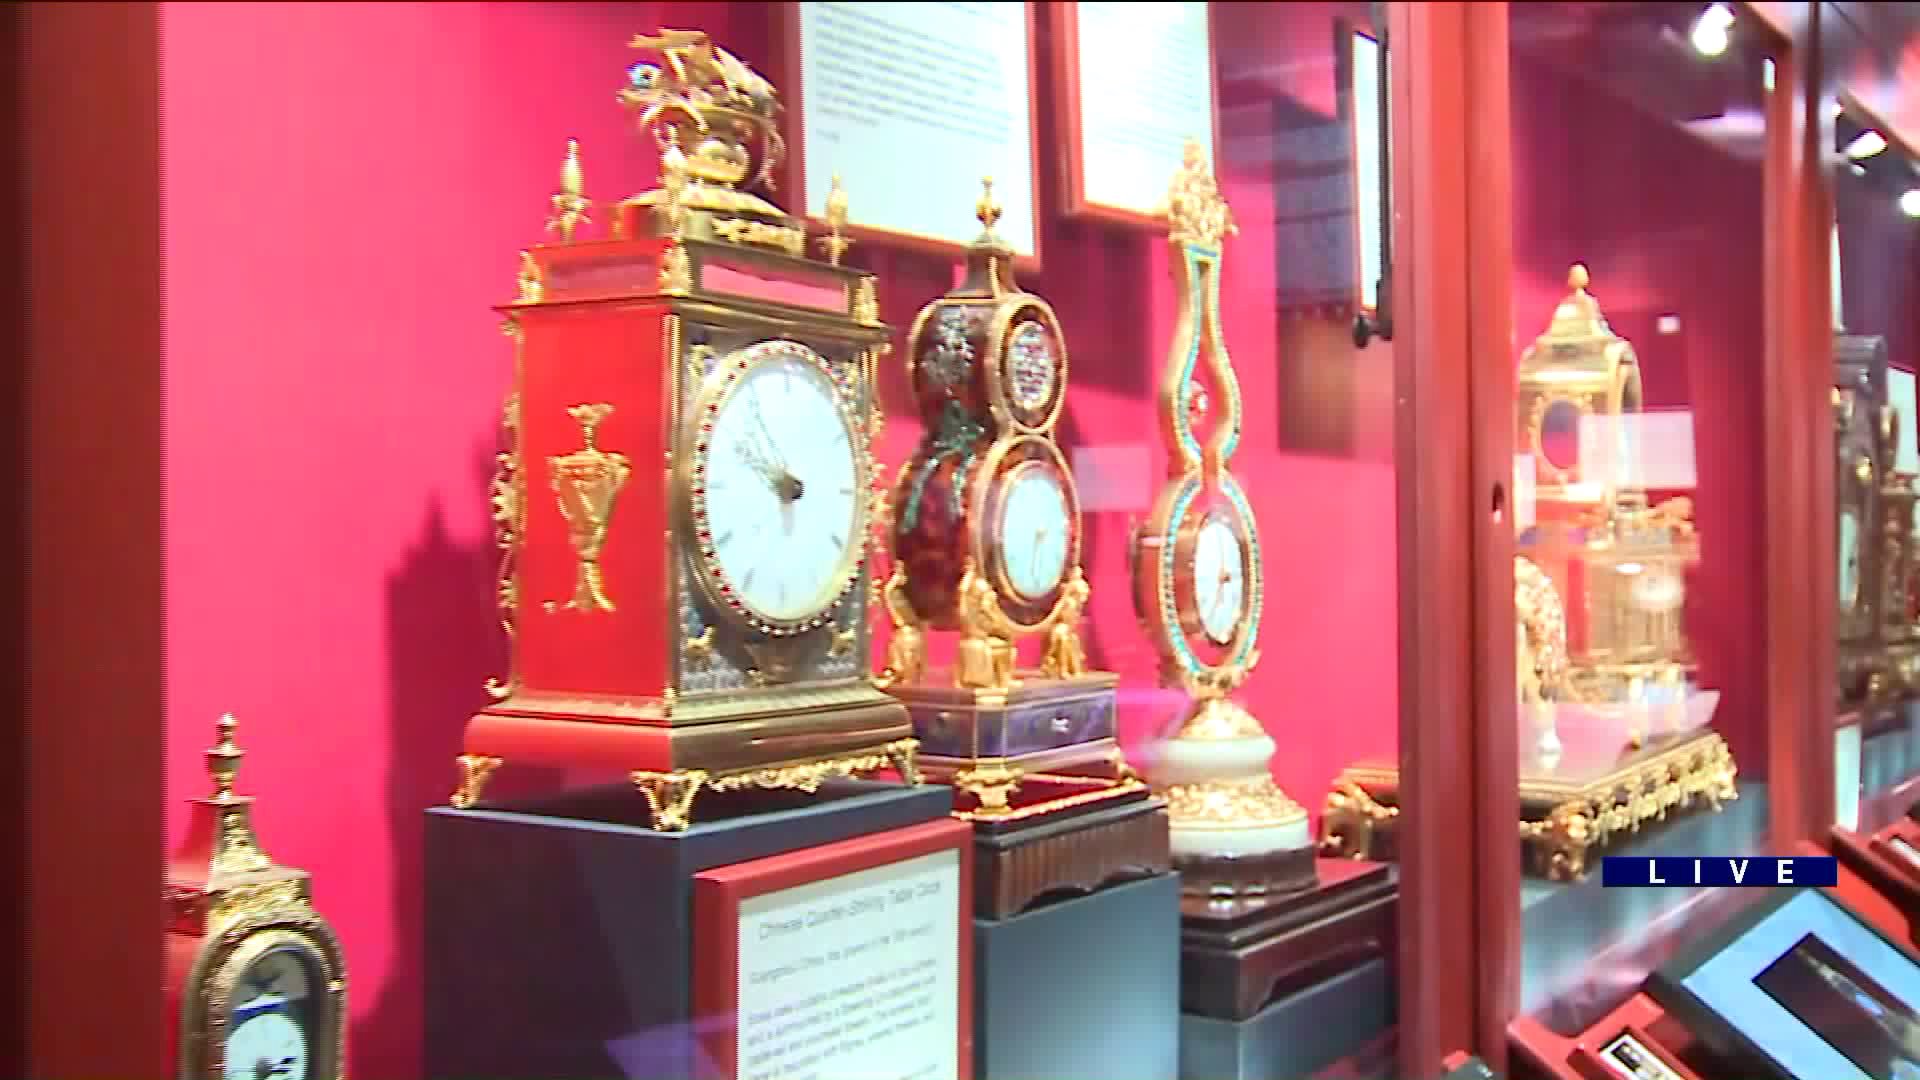 Around Town checks out the Halim Time and Glass Museum